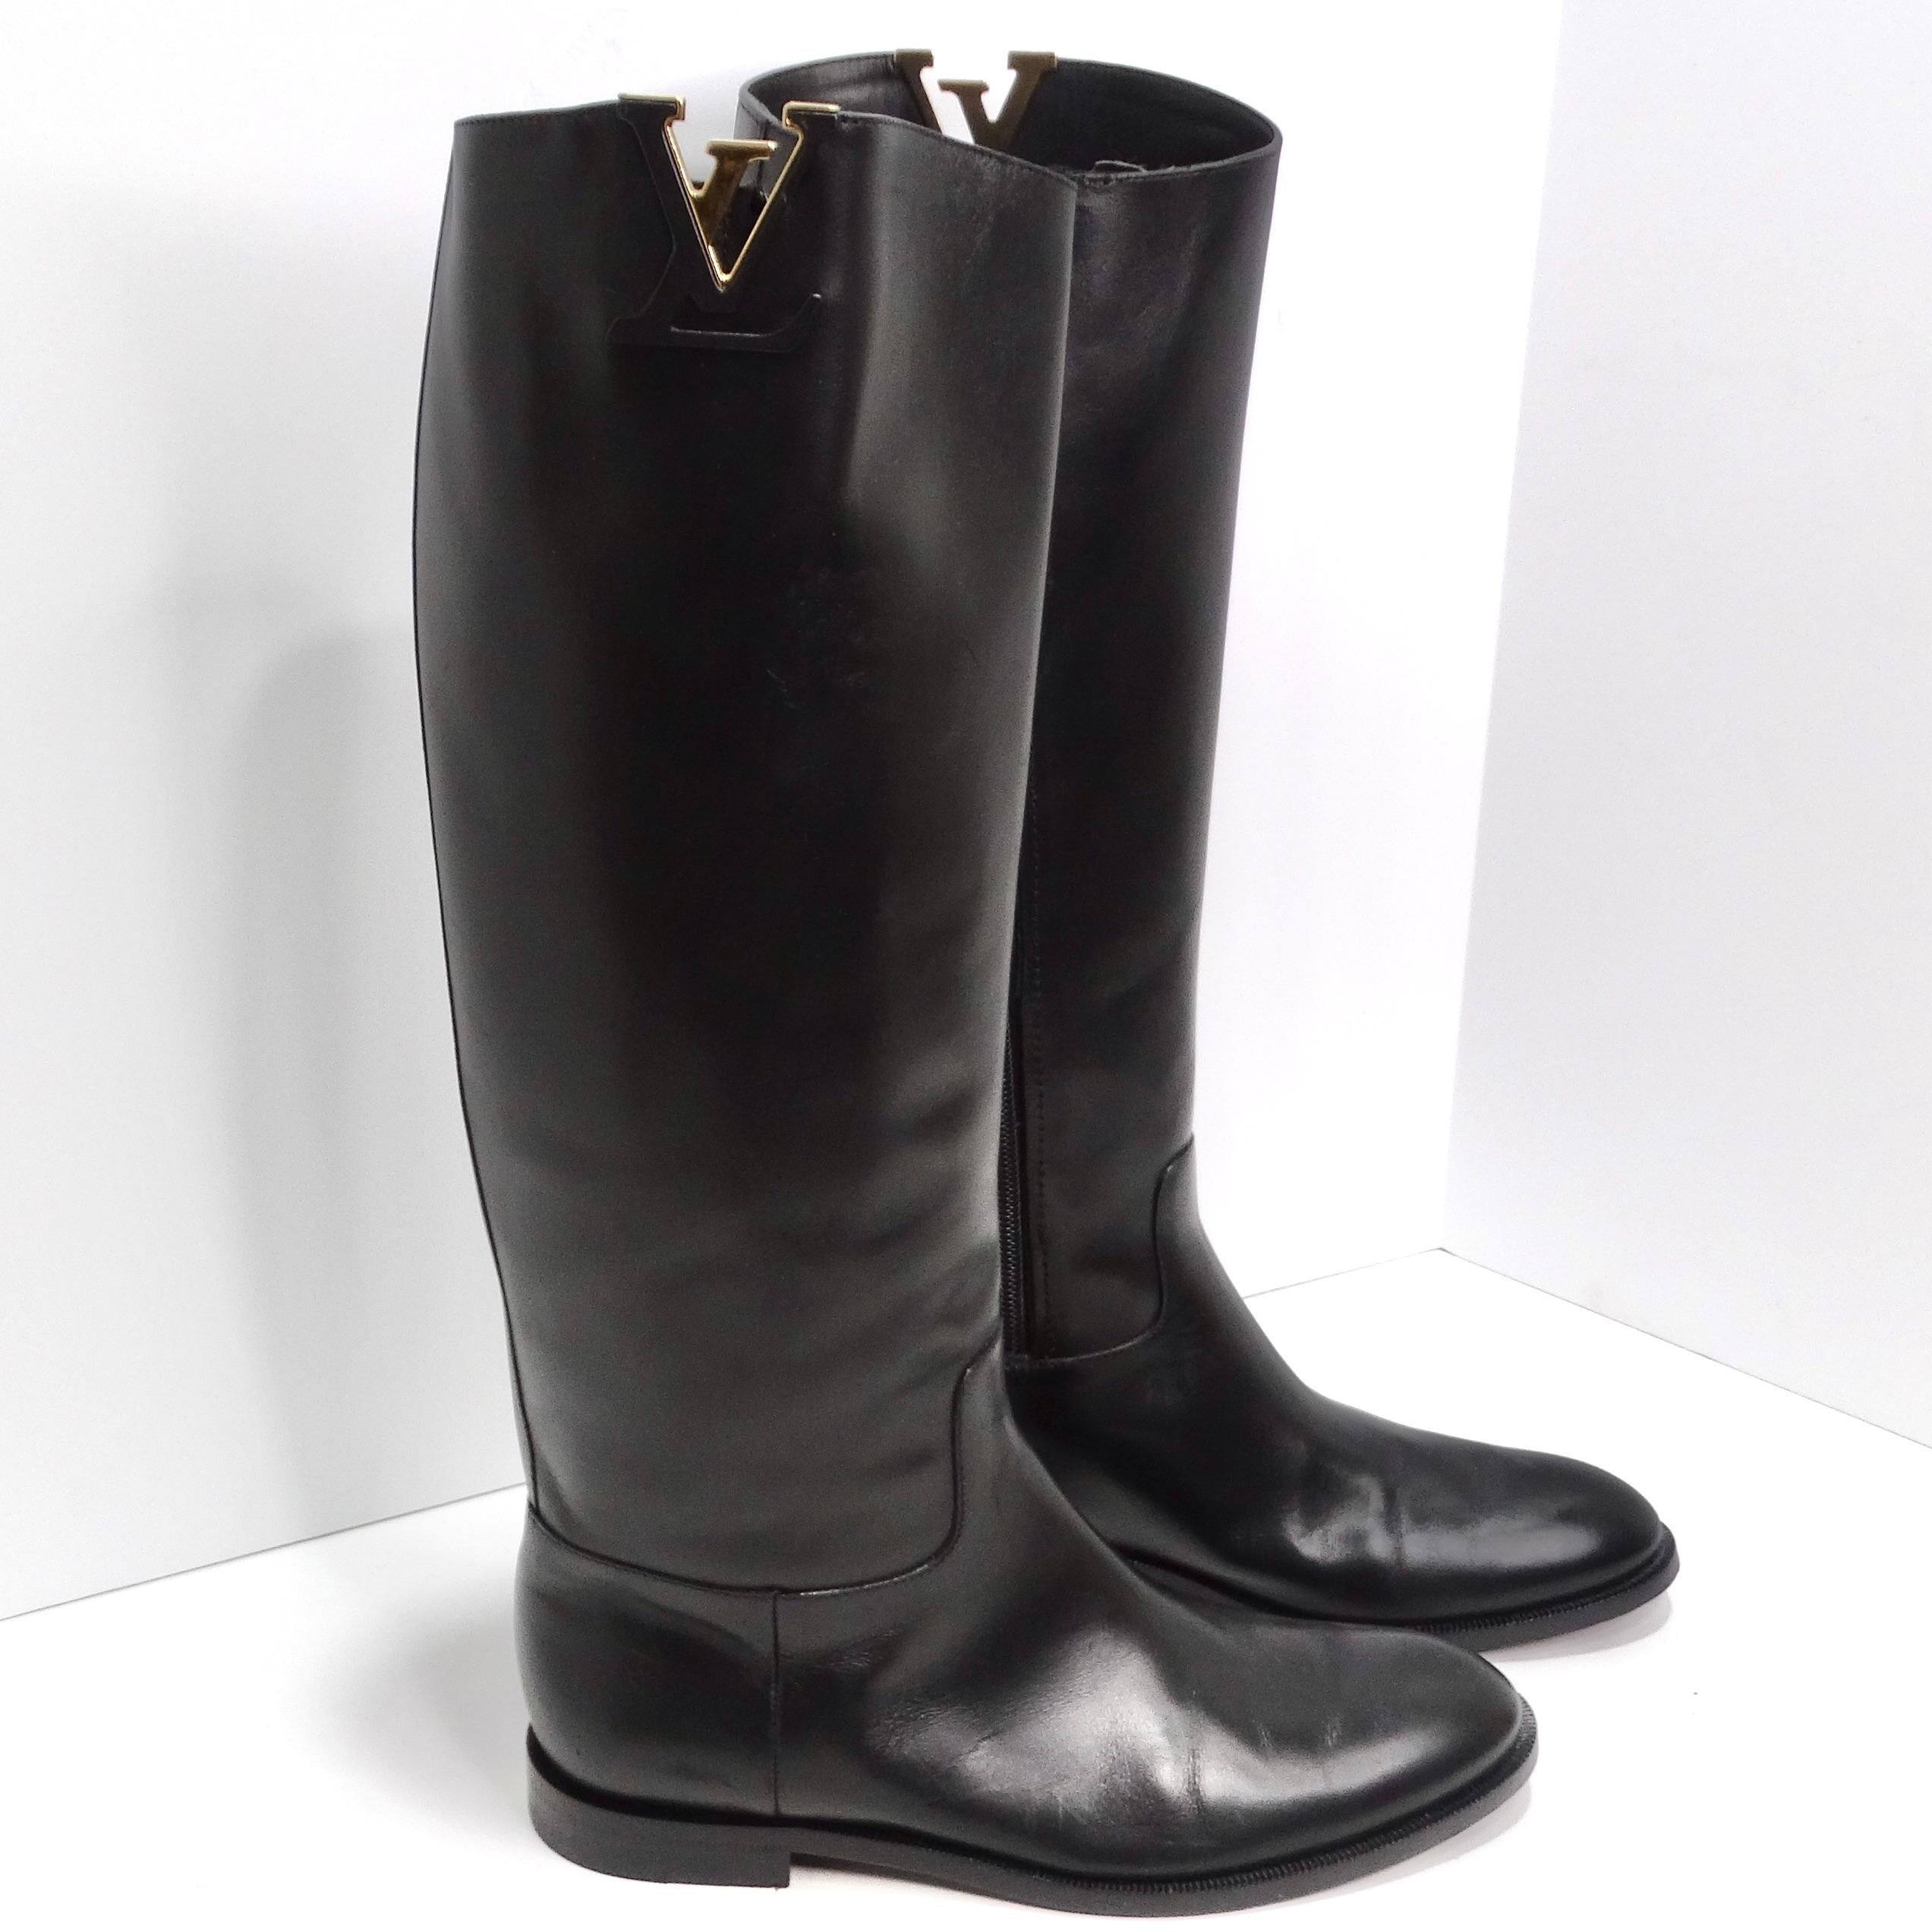  Louis Vuitton Heritage Black Leather Riding Boots For Sale 3